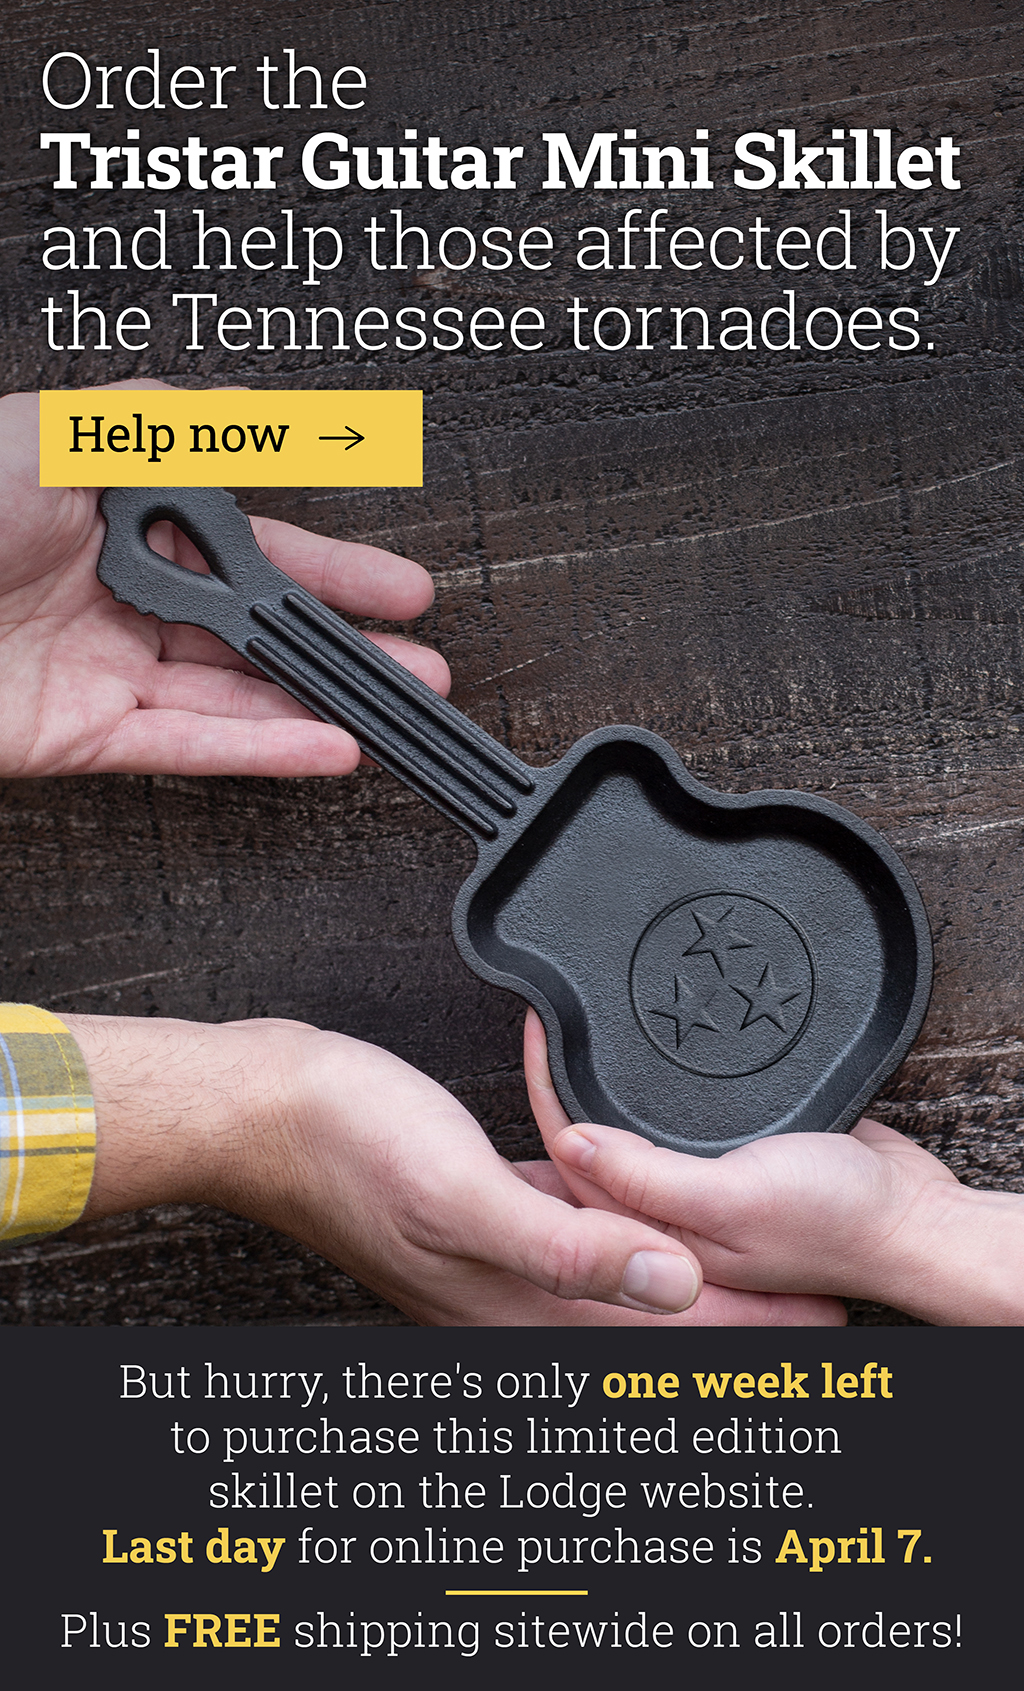 Order the Tristar Guitar Mini Skillet and help those affected by the Tennessee tornadoes. [Help now] But hurry, there''s only one week left to purchase this limited edition skillet on the Lodge website. Last day for online purchase is April 7.  Plus FREE shipping sitewide on all orders!